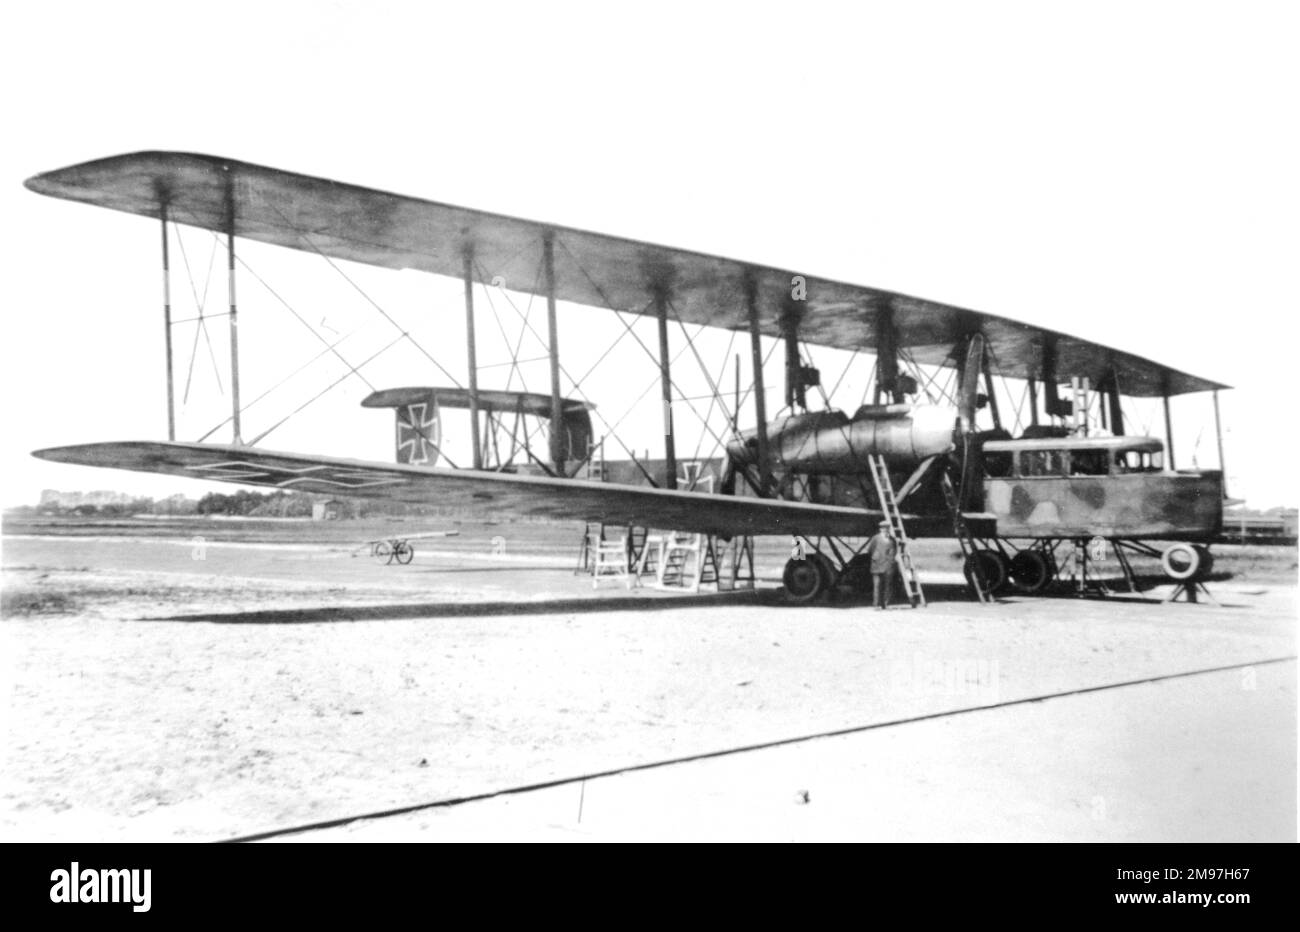 Zeppelin-Staaken R VI German long-range giant bomber, first flown in mid-1917.  A total of 18 were built.  They were delivered to the Western Front, and sometimes used in raids on the British mainland, as well as French ports and cities. Stock Photo